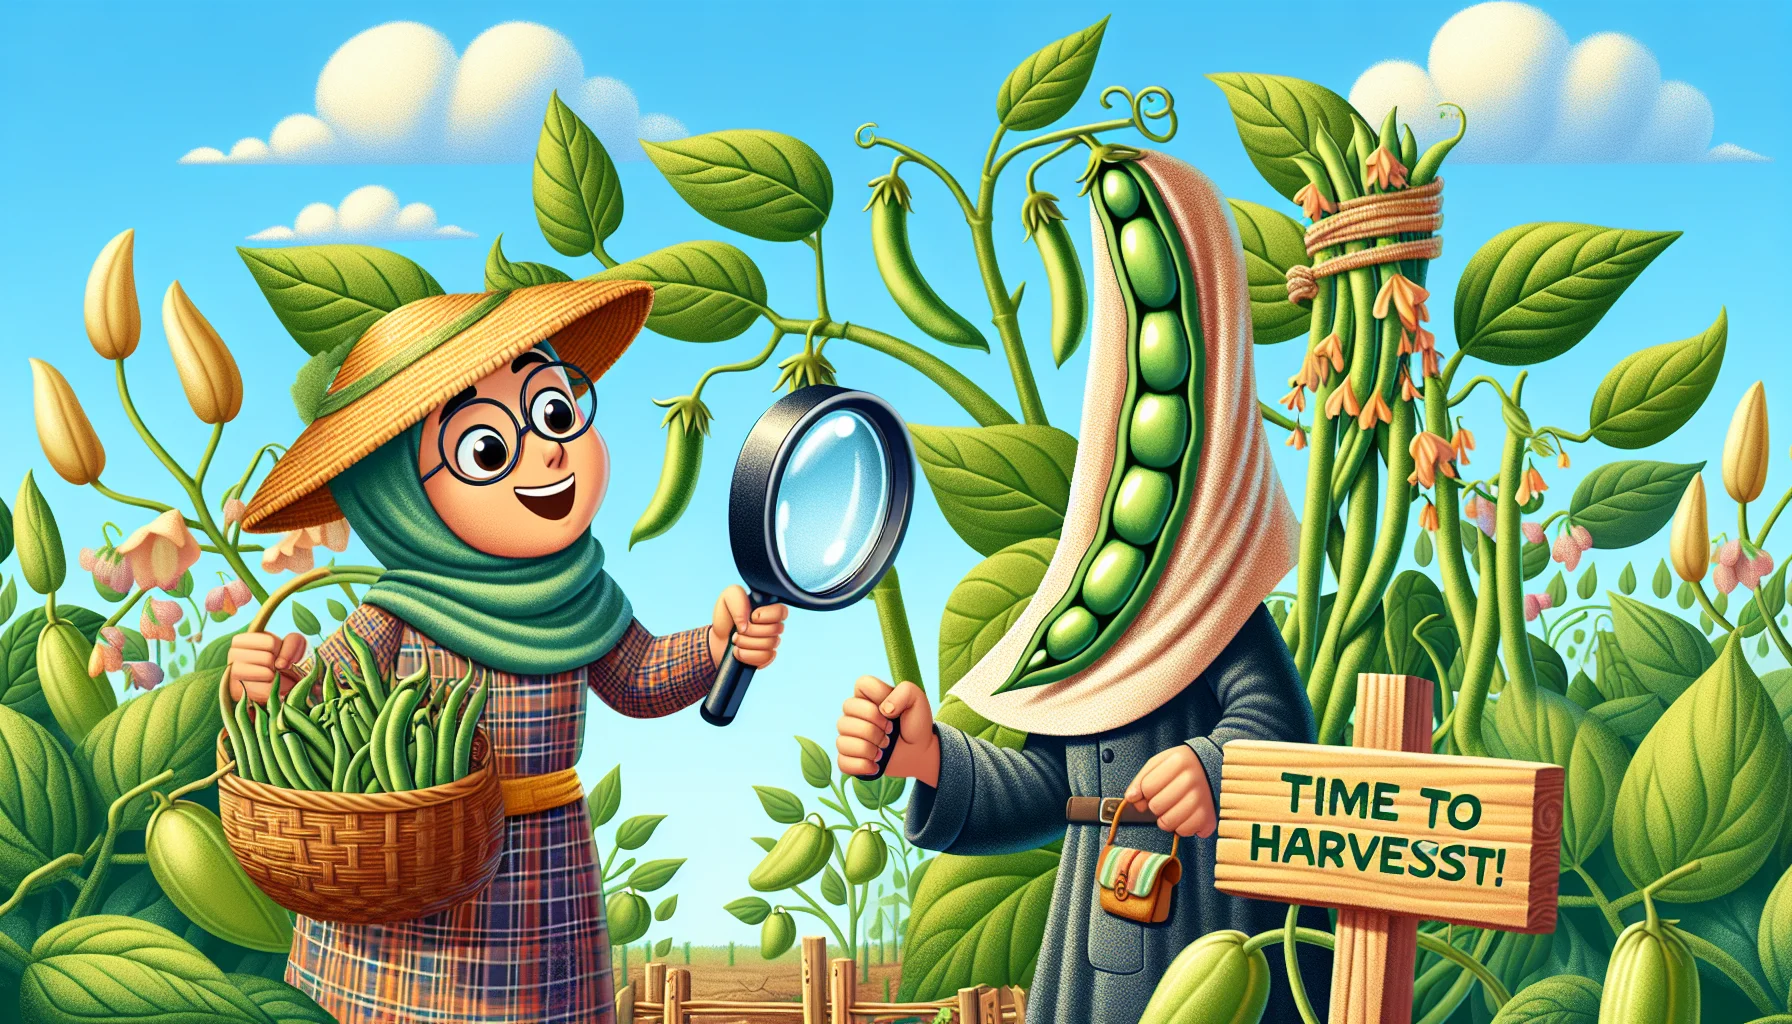 Generate a fun and educational image of a Middle-Eastern female farmer wearing a straw hat, standing amidst a bountiful green bean farm, holding a large magnifying glass examining a ripe green bean on a plant. She has a surprised expression due to the enormous size of the bean. Around her, there are green bean plants depicting various stages of maturity - from flowering to fully mature pods. A wooden signpost near her reads, 'Time to Harvest!'. A mix of the comedic and the instructional, this harmonious scene promotes the joy of gardening.